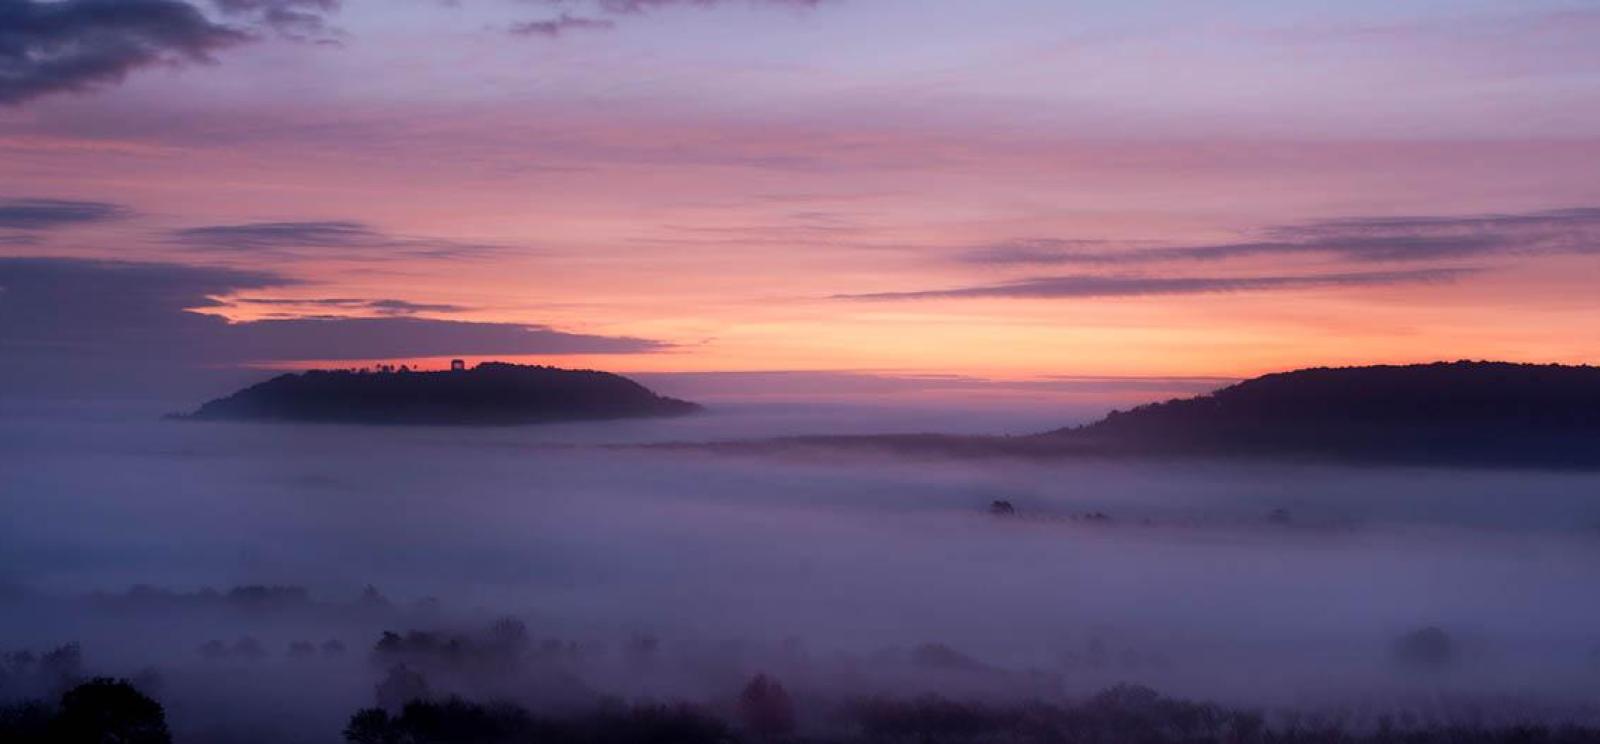 Modern photograph of an empty field and wood at dawn. The ground is covered by a thick mist.